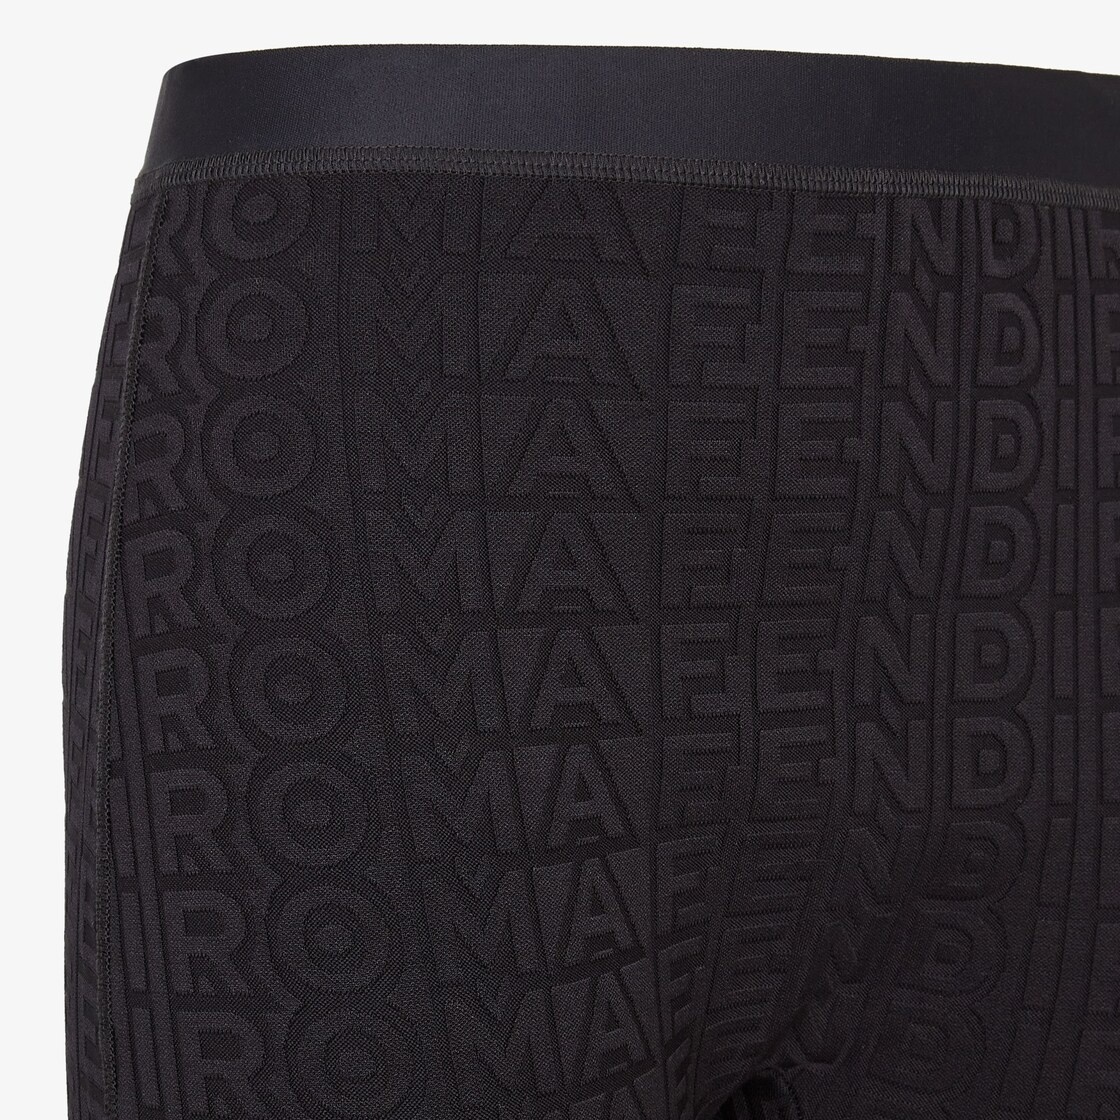 Tight-fitting leggings made of black fabric. The Fendi Roma logo is reinterpreted by Marc Jacobs in  - 3